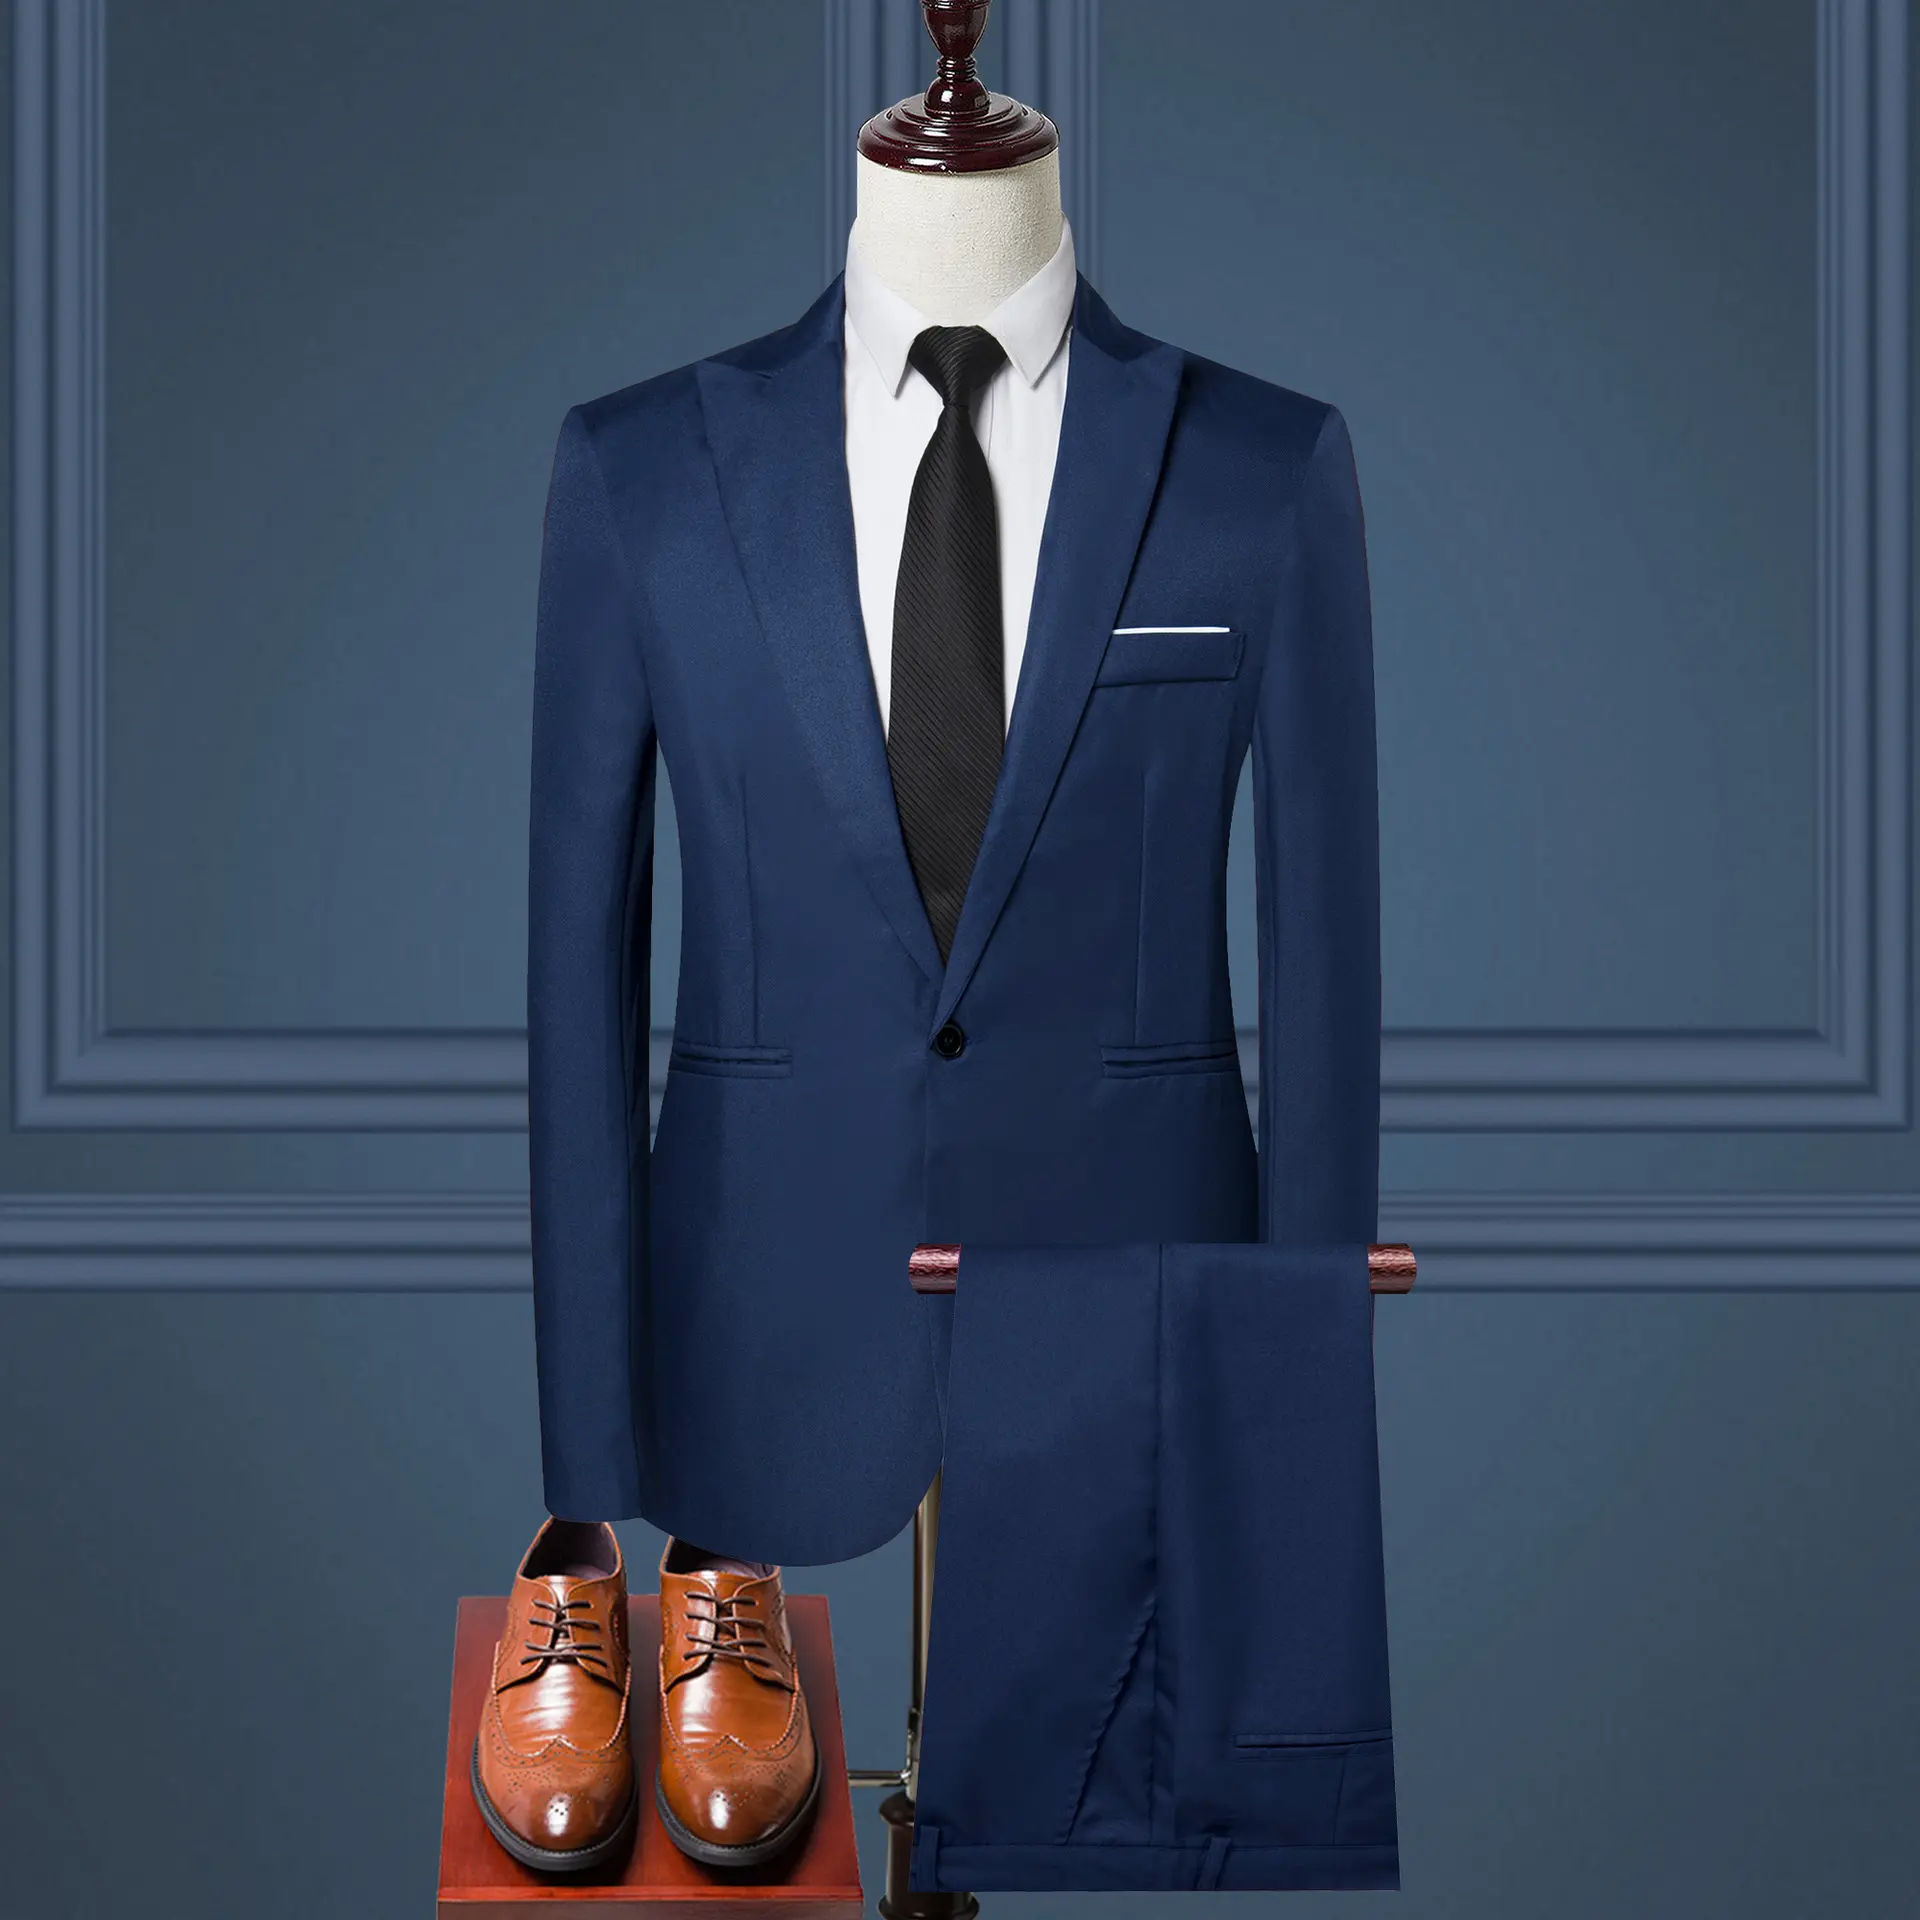 Spring and autumn new men's fashion business casual British suits men's professional wear men's suits